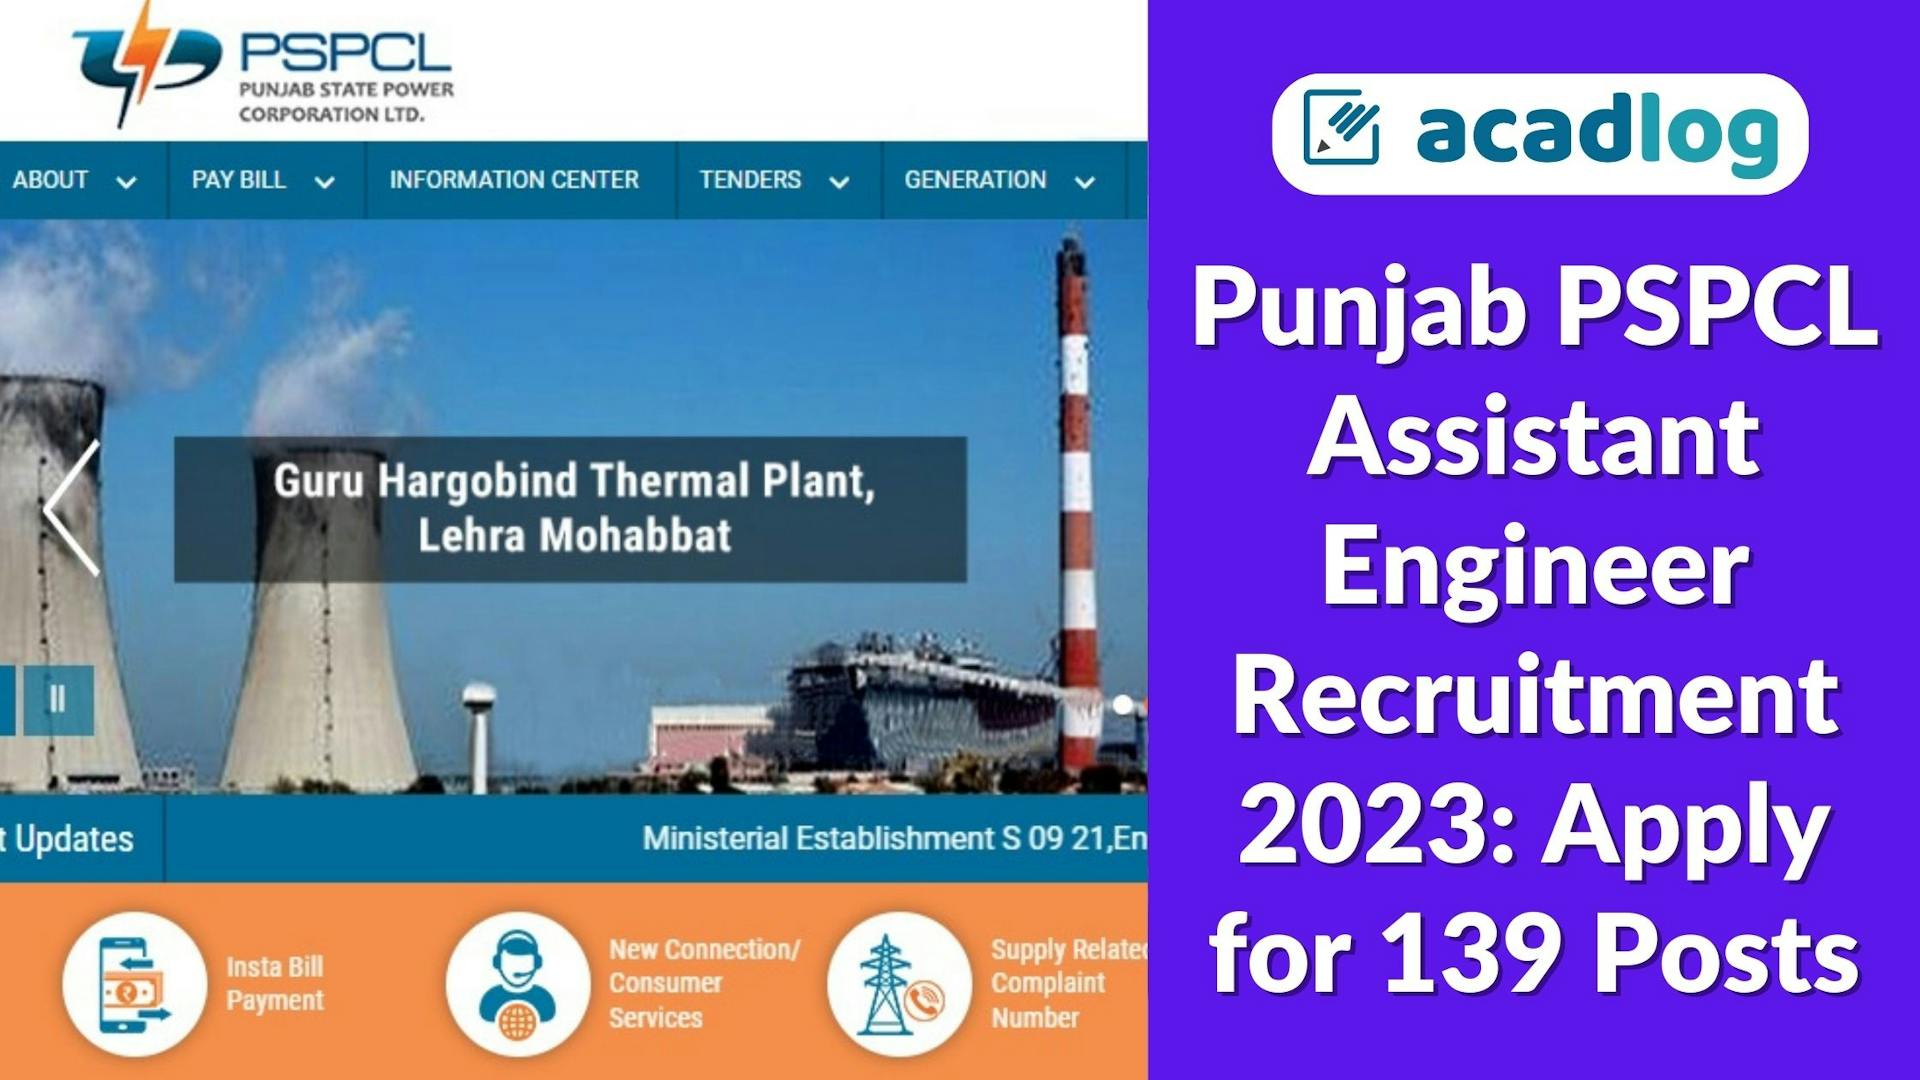 Punjab PSPCL Assistant Engineer Recruitment 2023: Apply for 139 Posts